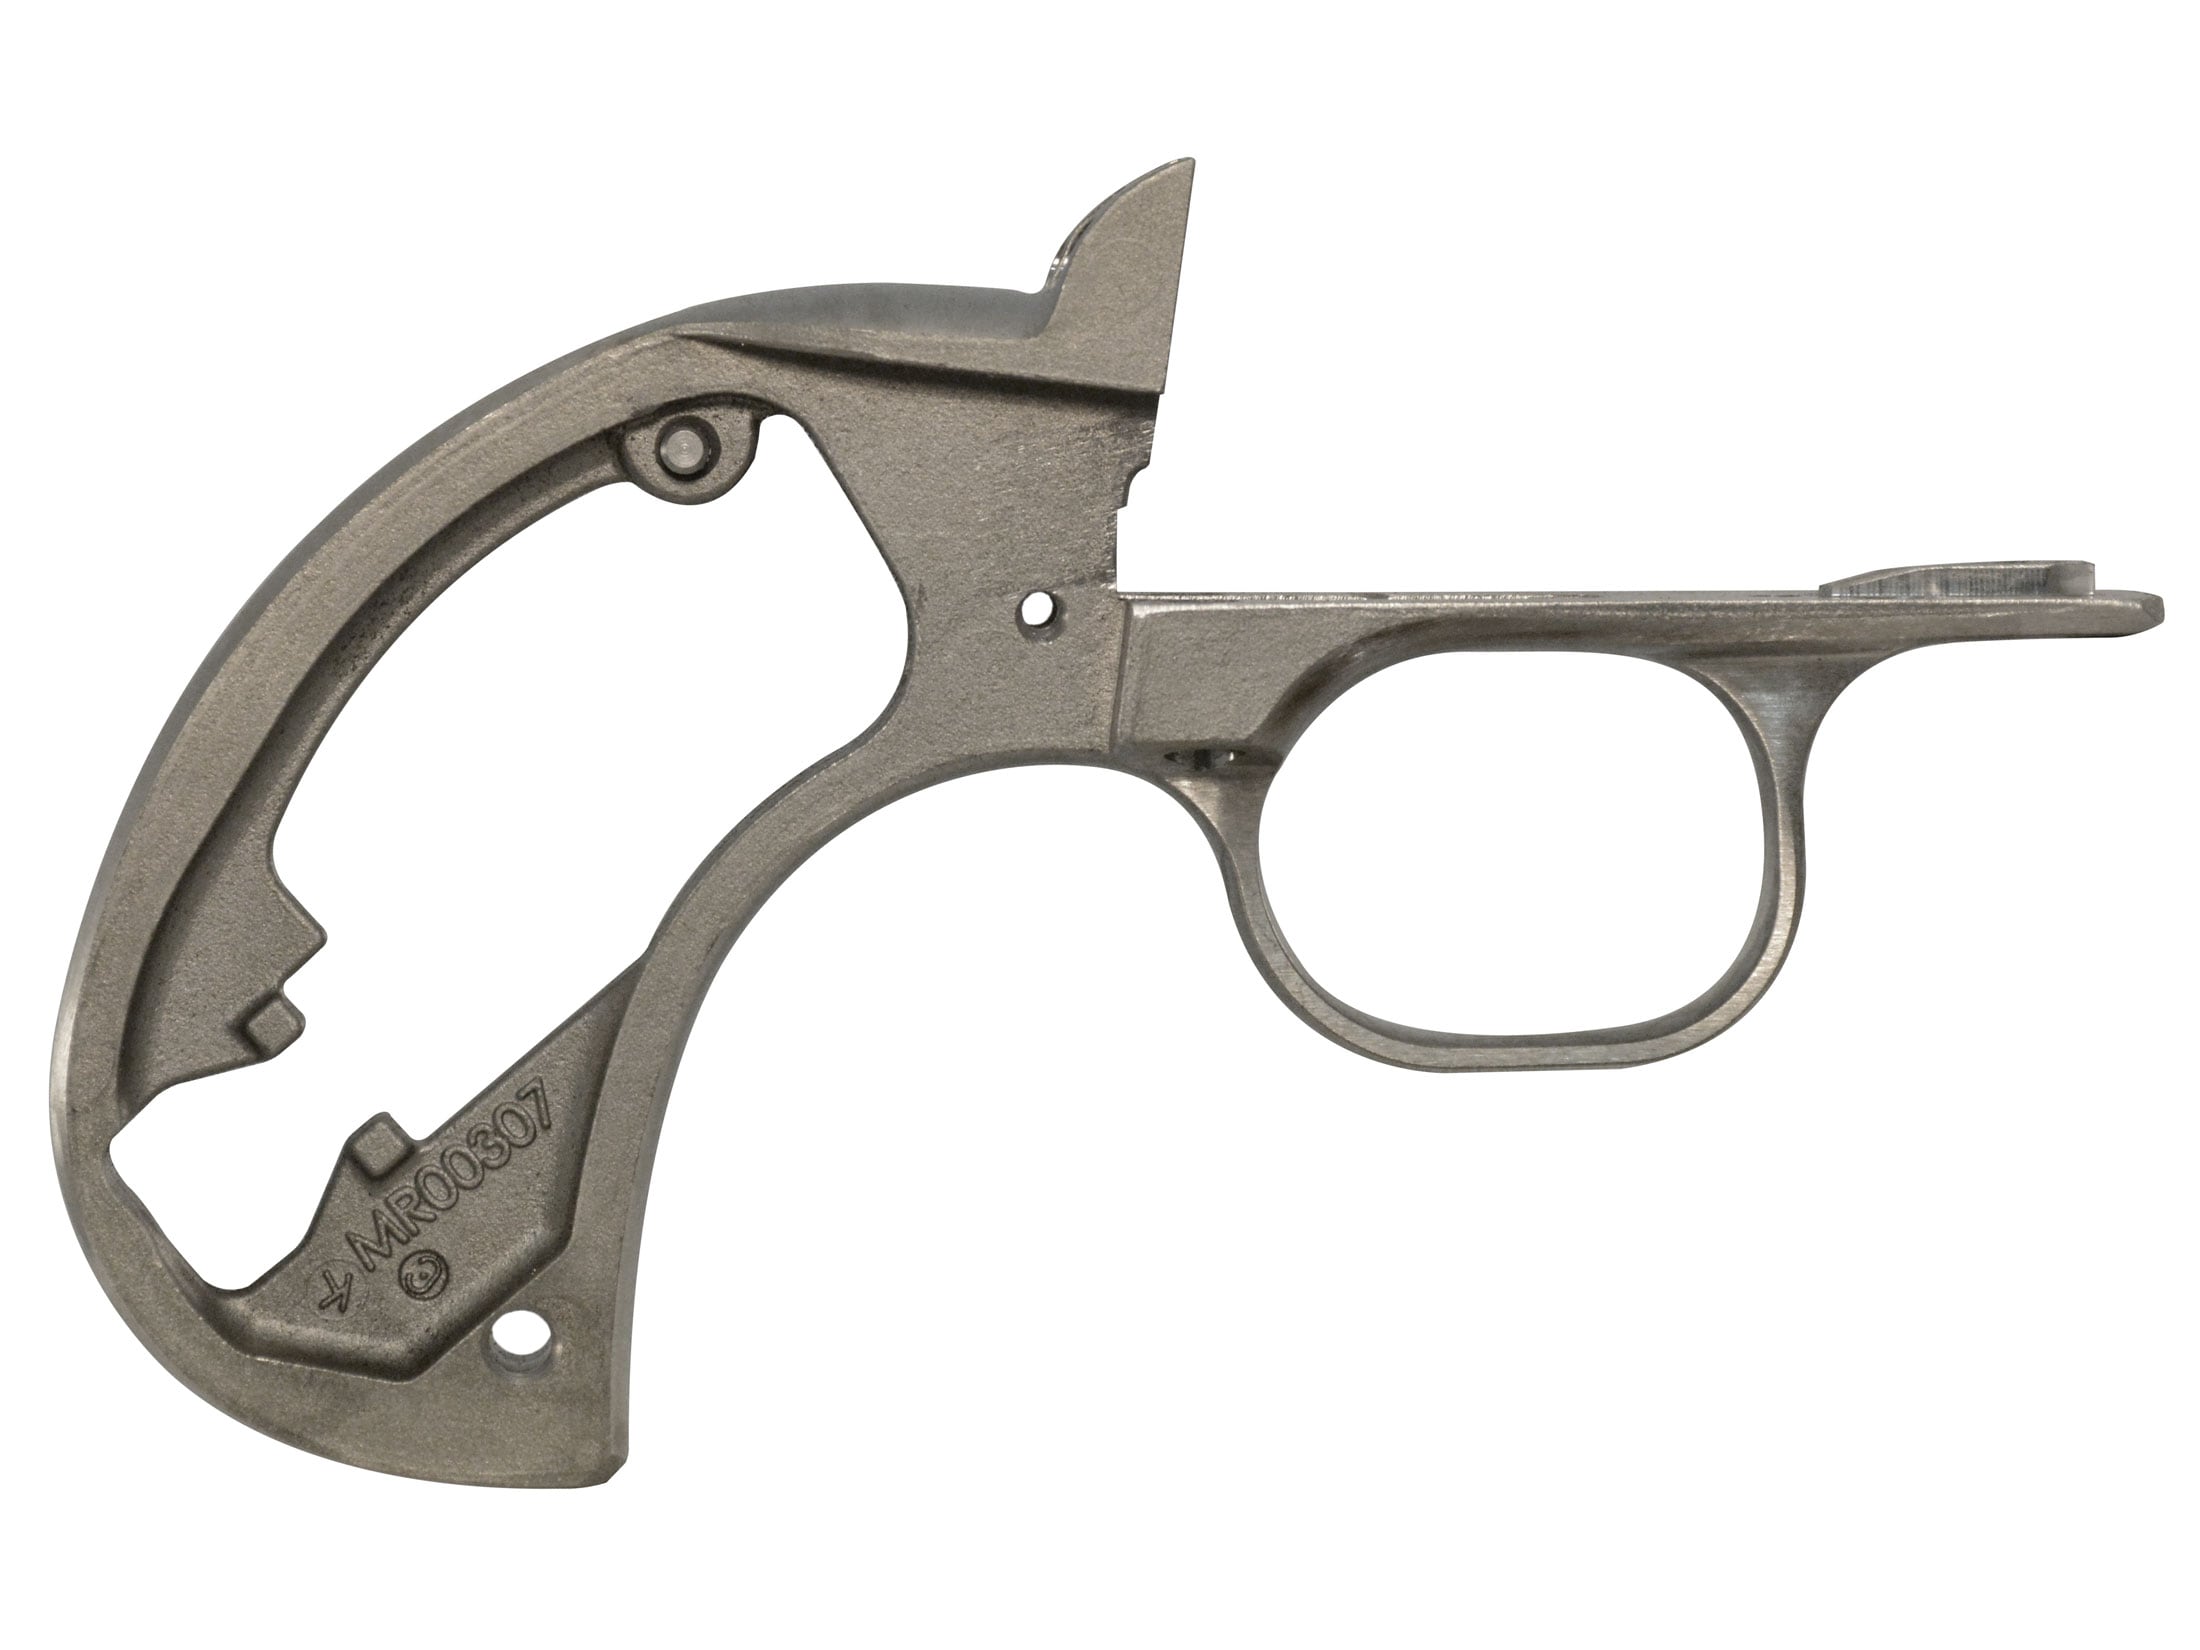 Ruger Grip Frame Bird's Head Ruger New Model Single Six Vaquero (Large